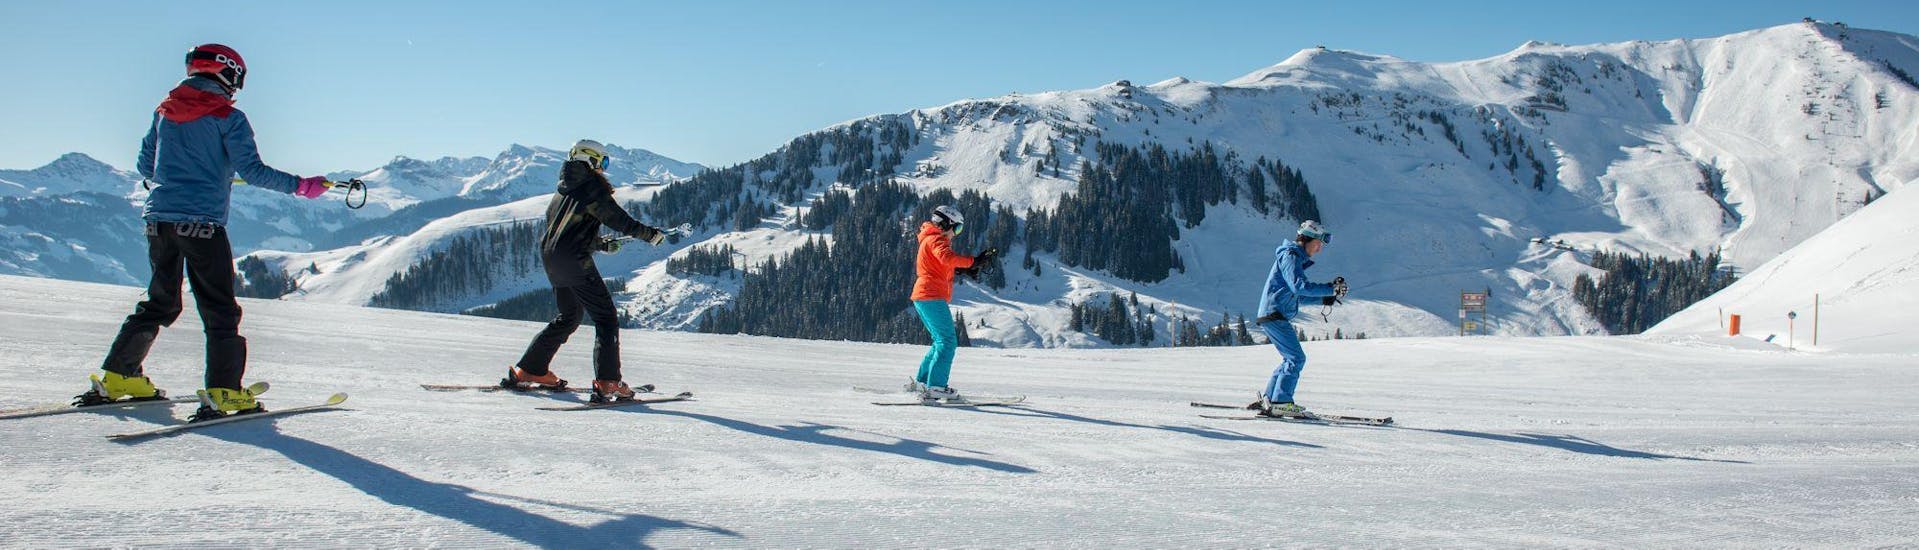 Adults are doing Adult Ski Lessons for Beginners with Element3 Ski School Kitzbühel.